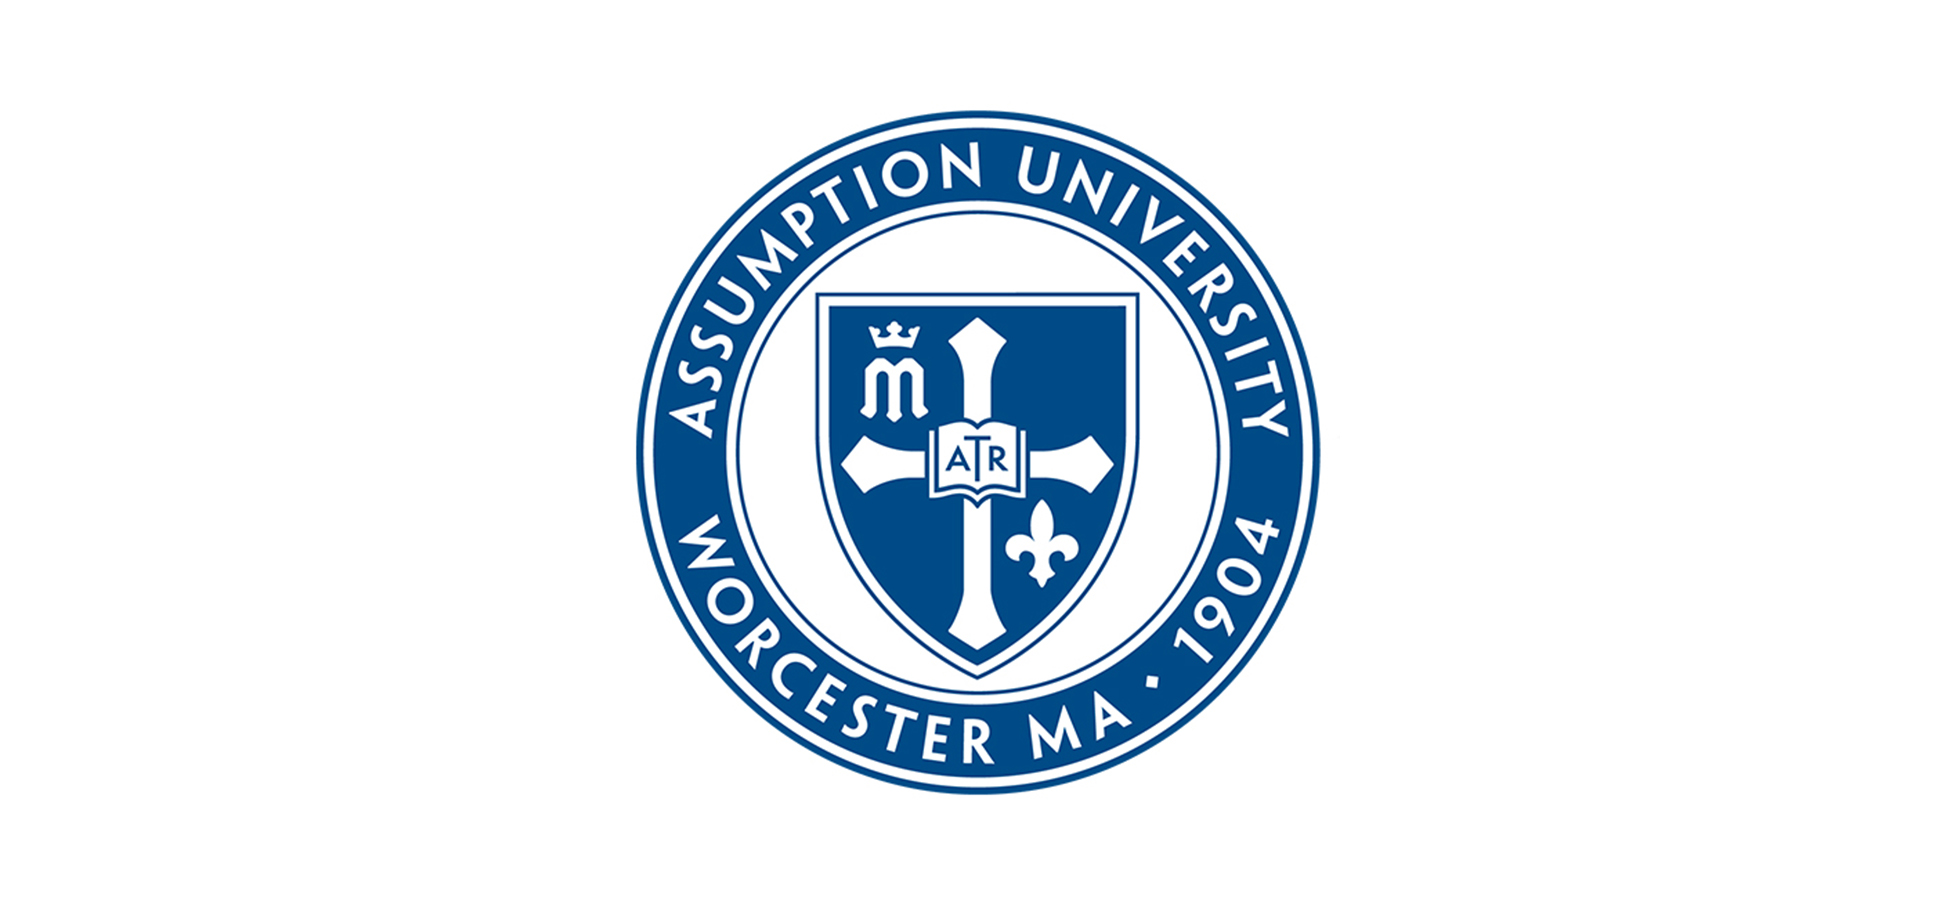 Assumption Temporarily Suspends Rome Campus Operations Amid Global Health Crisis